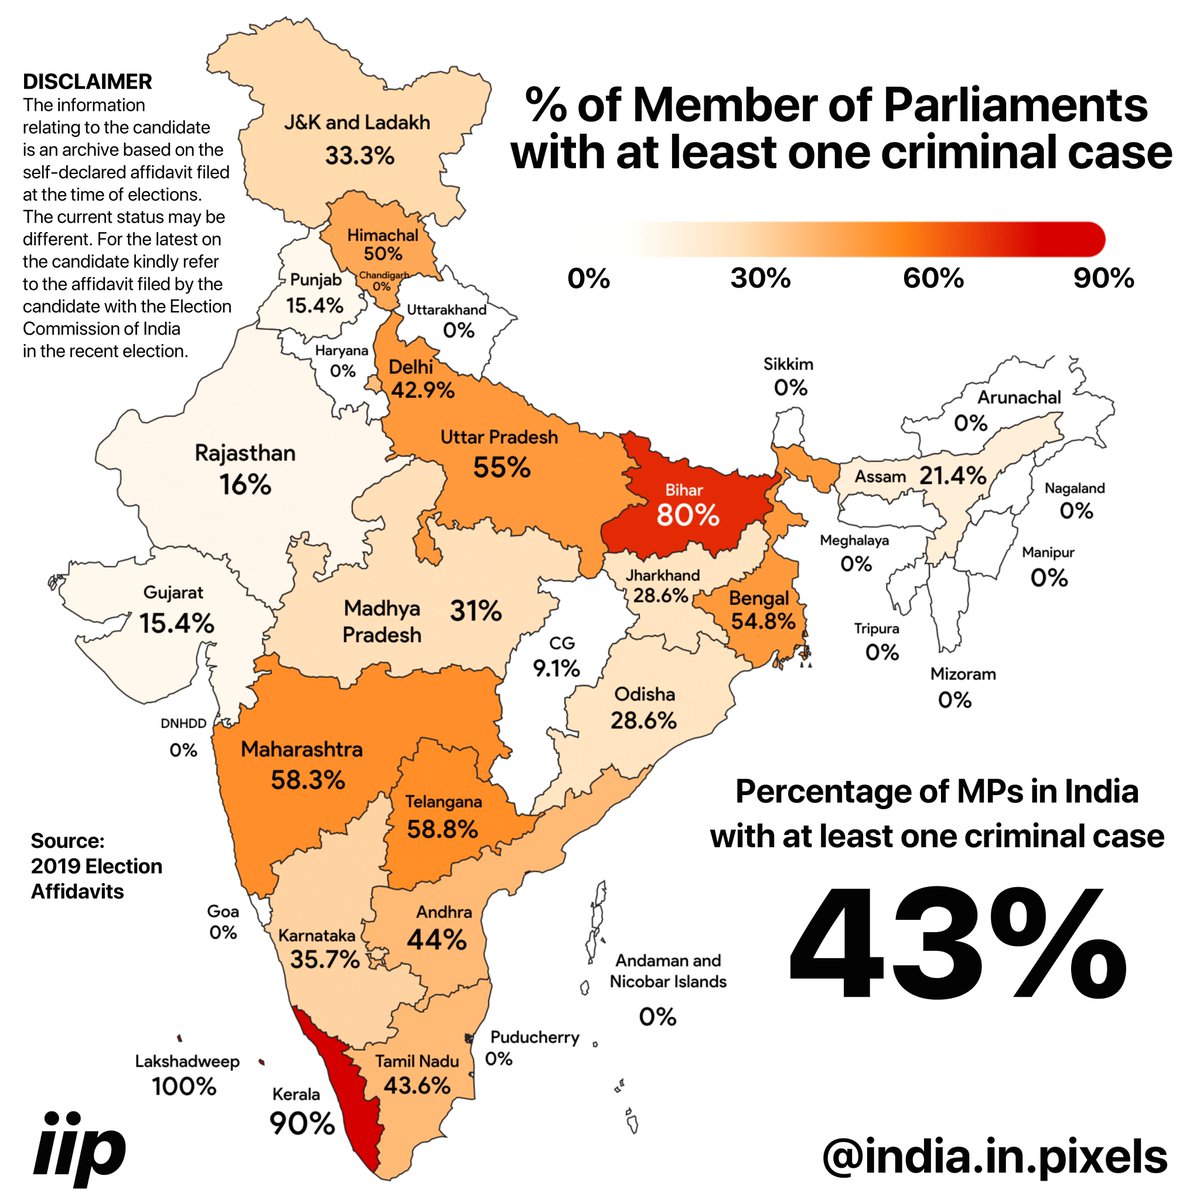 What percentage of Members of the Parliament of India had at least one criminal case? Spoiler alert: 43%